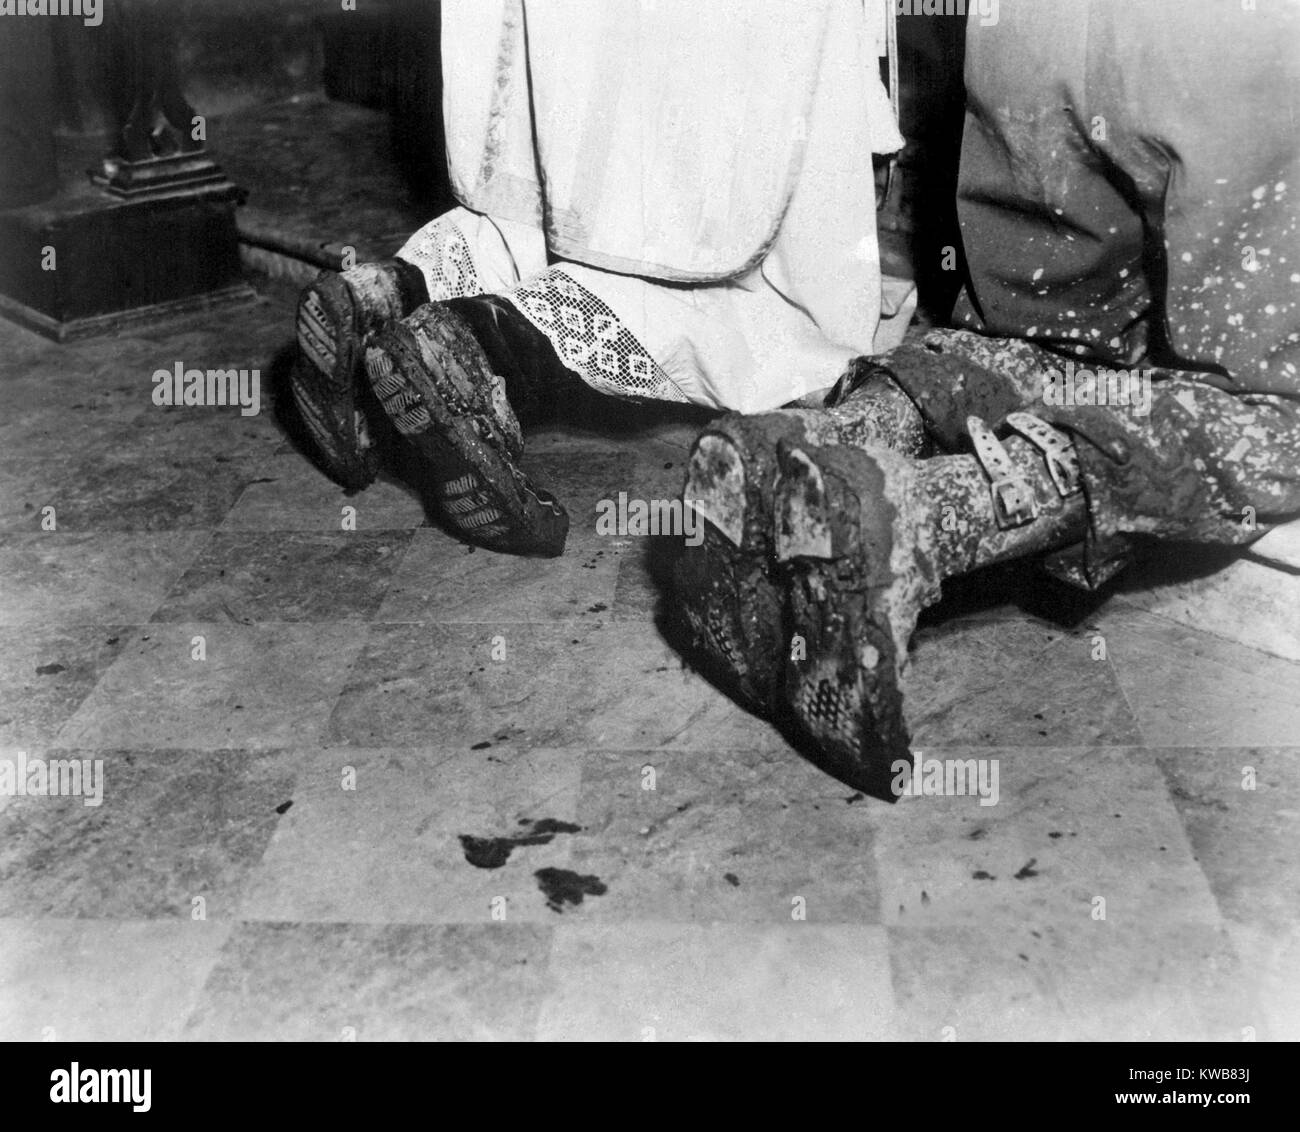 With soiled army boots, a Chaplain and soldier kneel at Catholic Mass is held for two dead soldiers. Oct. 11, 1944. San Benedetto, Italy. World war 2. (BSLOC_2014_10_51) Stock Photo